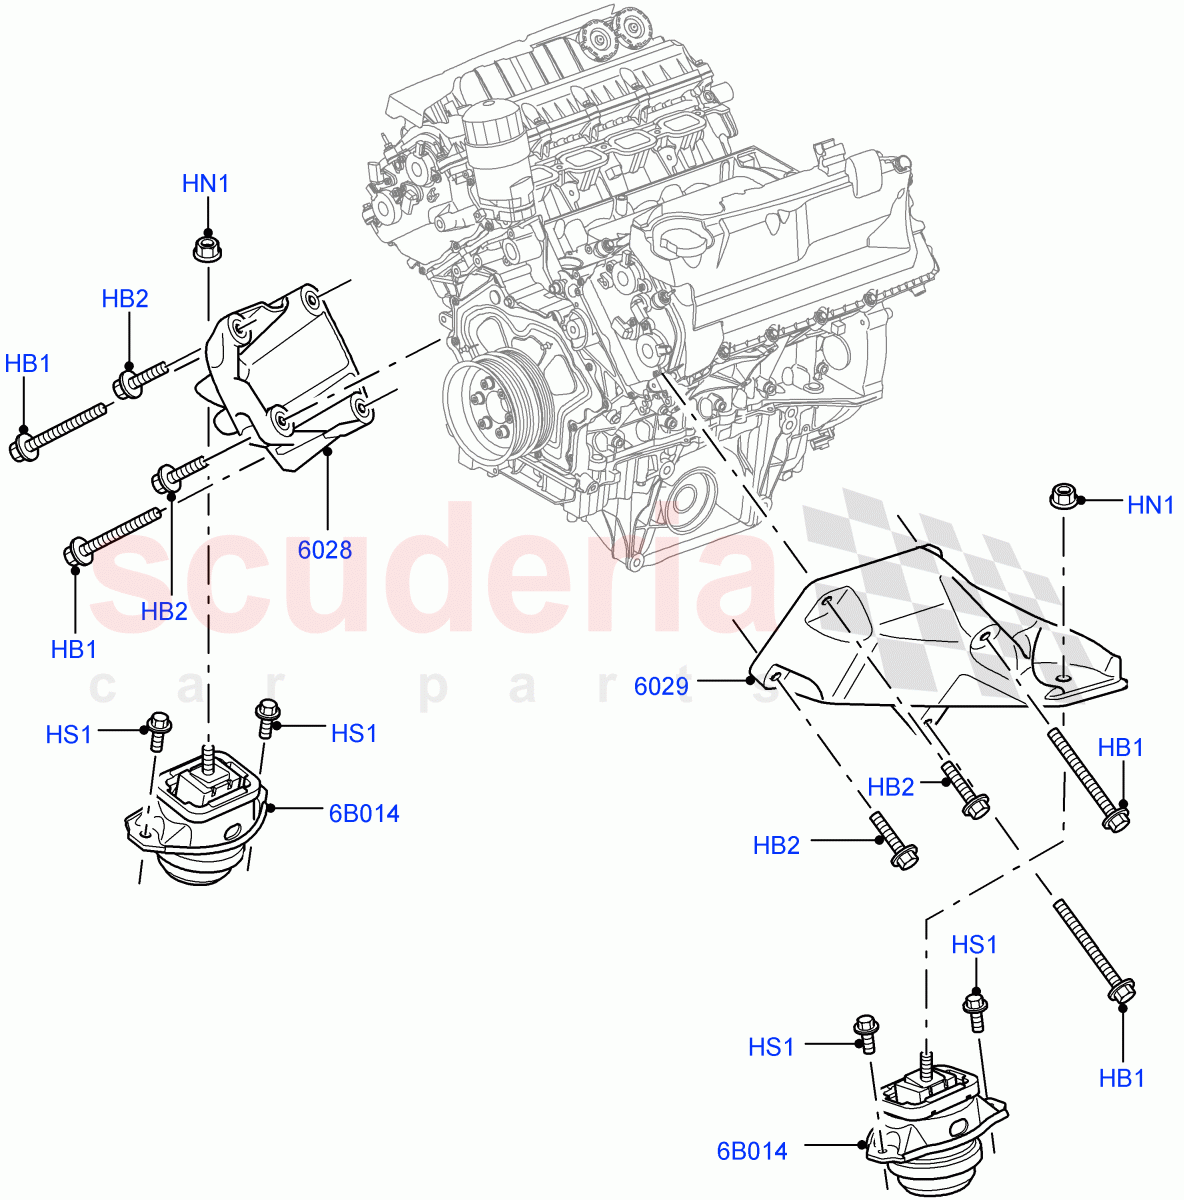 Engine Mounting(5.0L OHC SGDI NA V8 Petrol - AJ133)((V)FROMAA000001) of Land Rover Land Rover Discovery 4 (2010-2016) [3.0 Diesel 24V DOHC TC]